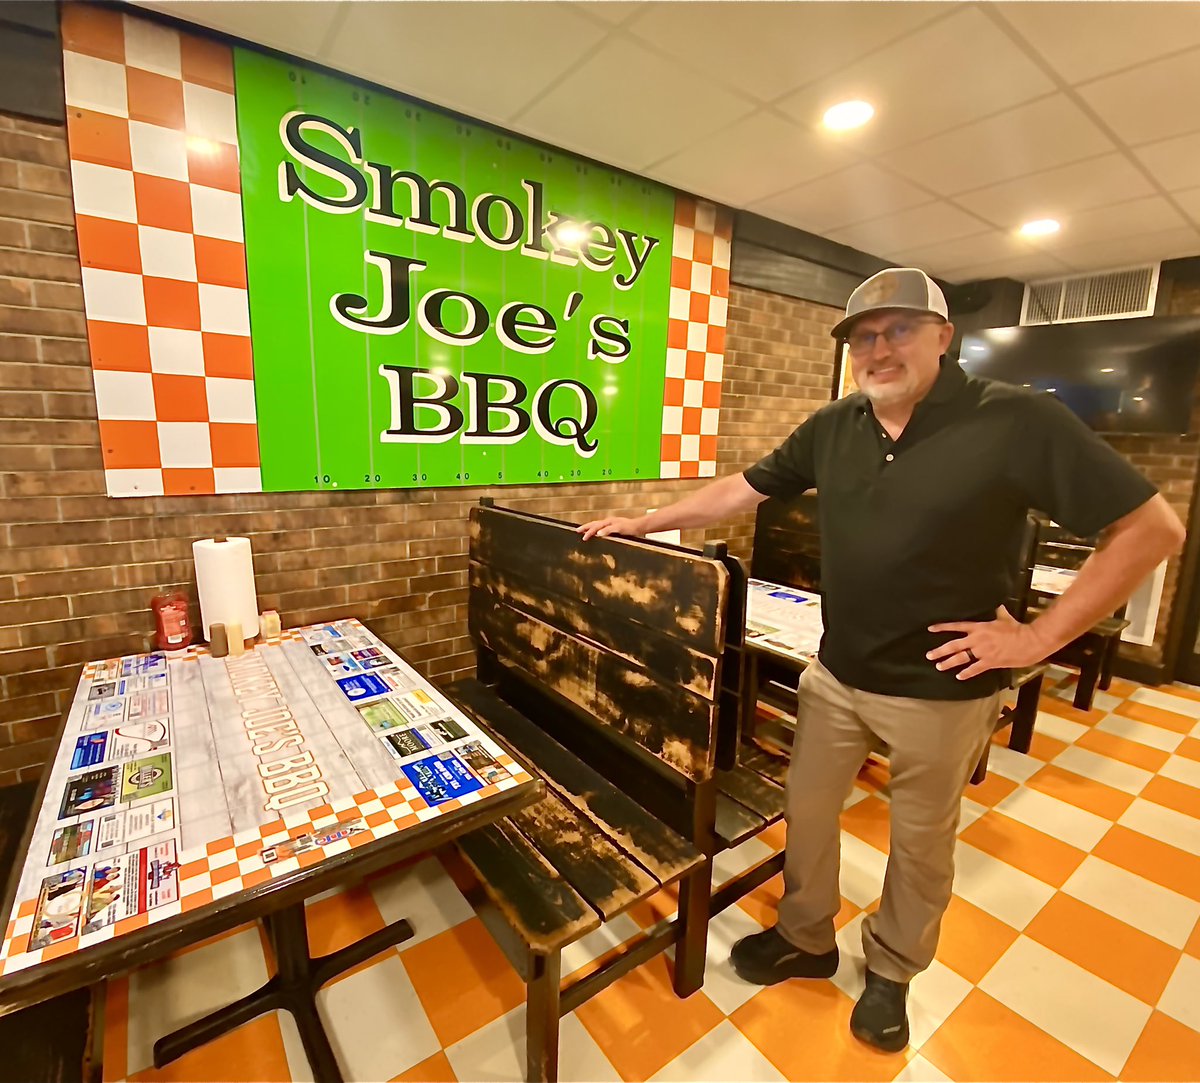 Mike welcomes everyone back to Smokey Joe's BBQ, Tuesday, April 30! 

#ShopMcNairy #MeetMcNairy #BBQ #pulledpork #rockytop #rockytoptennessee #govols #tnvacation